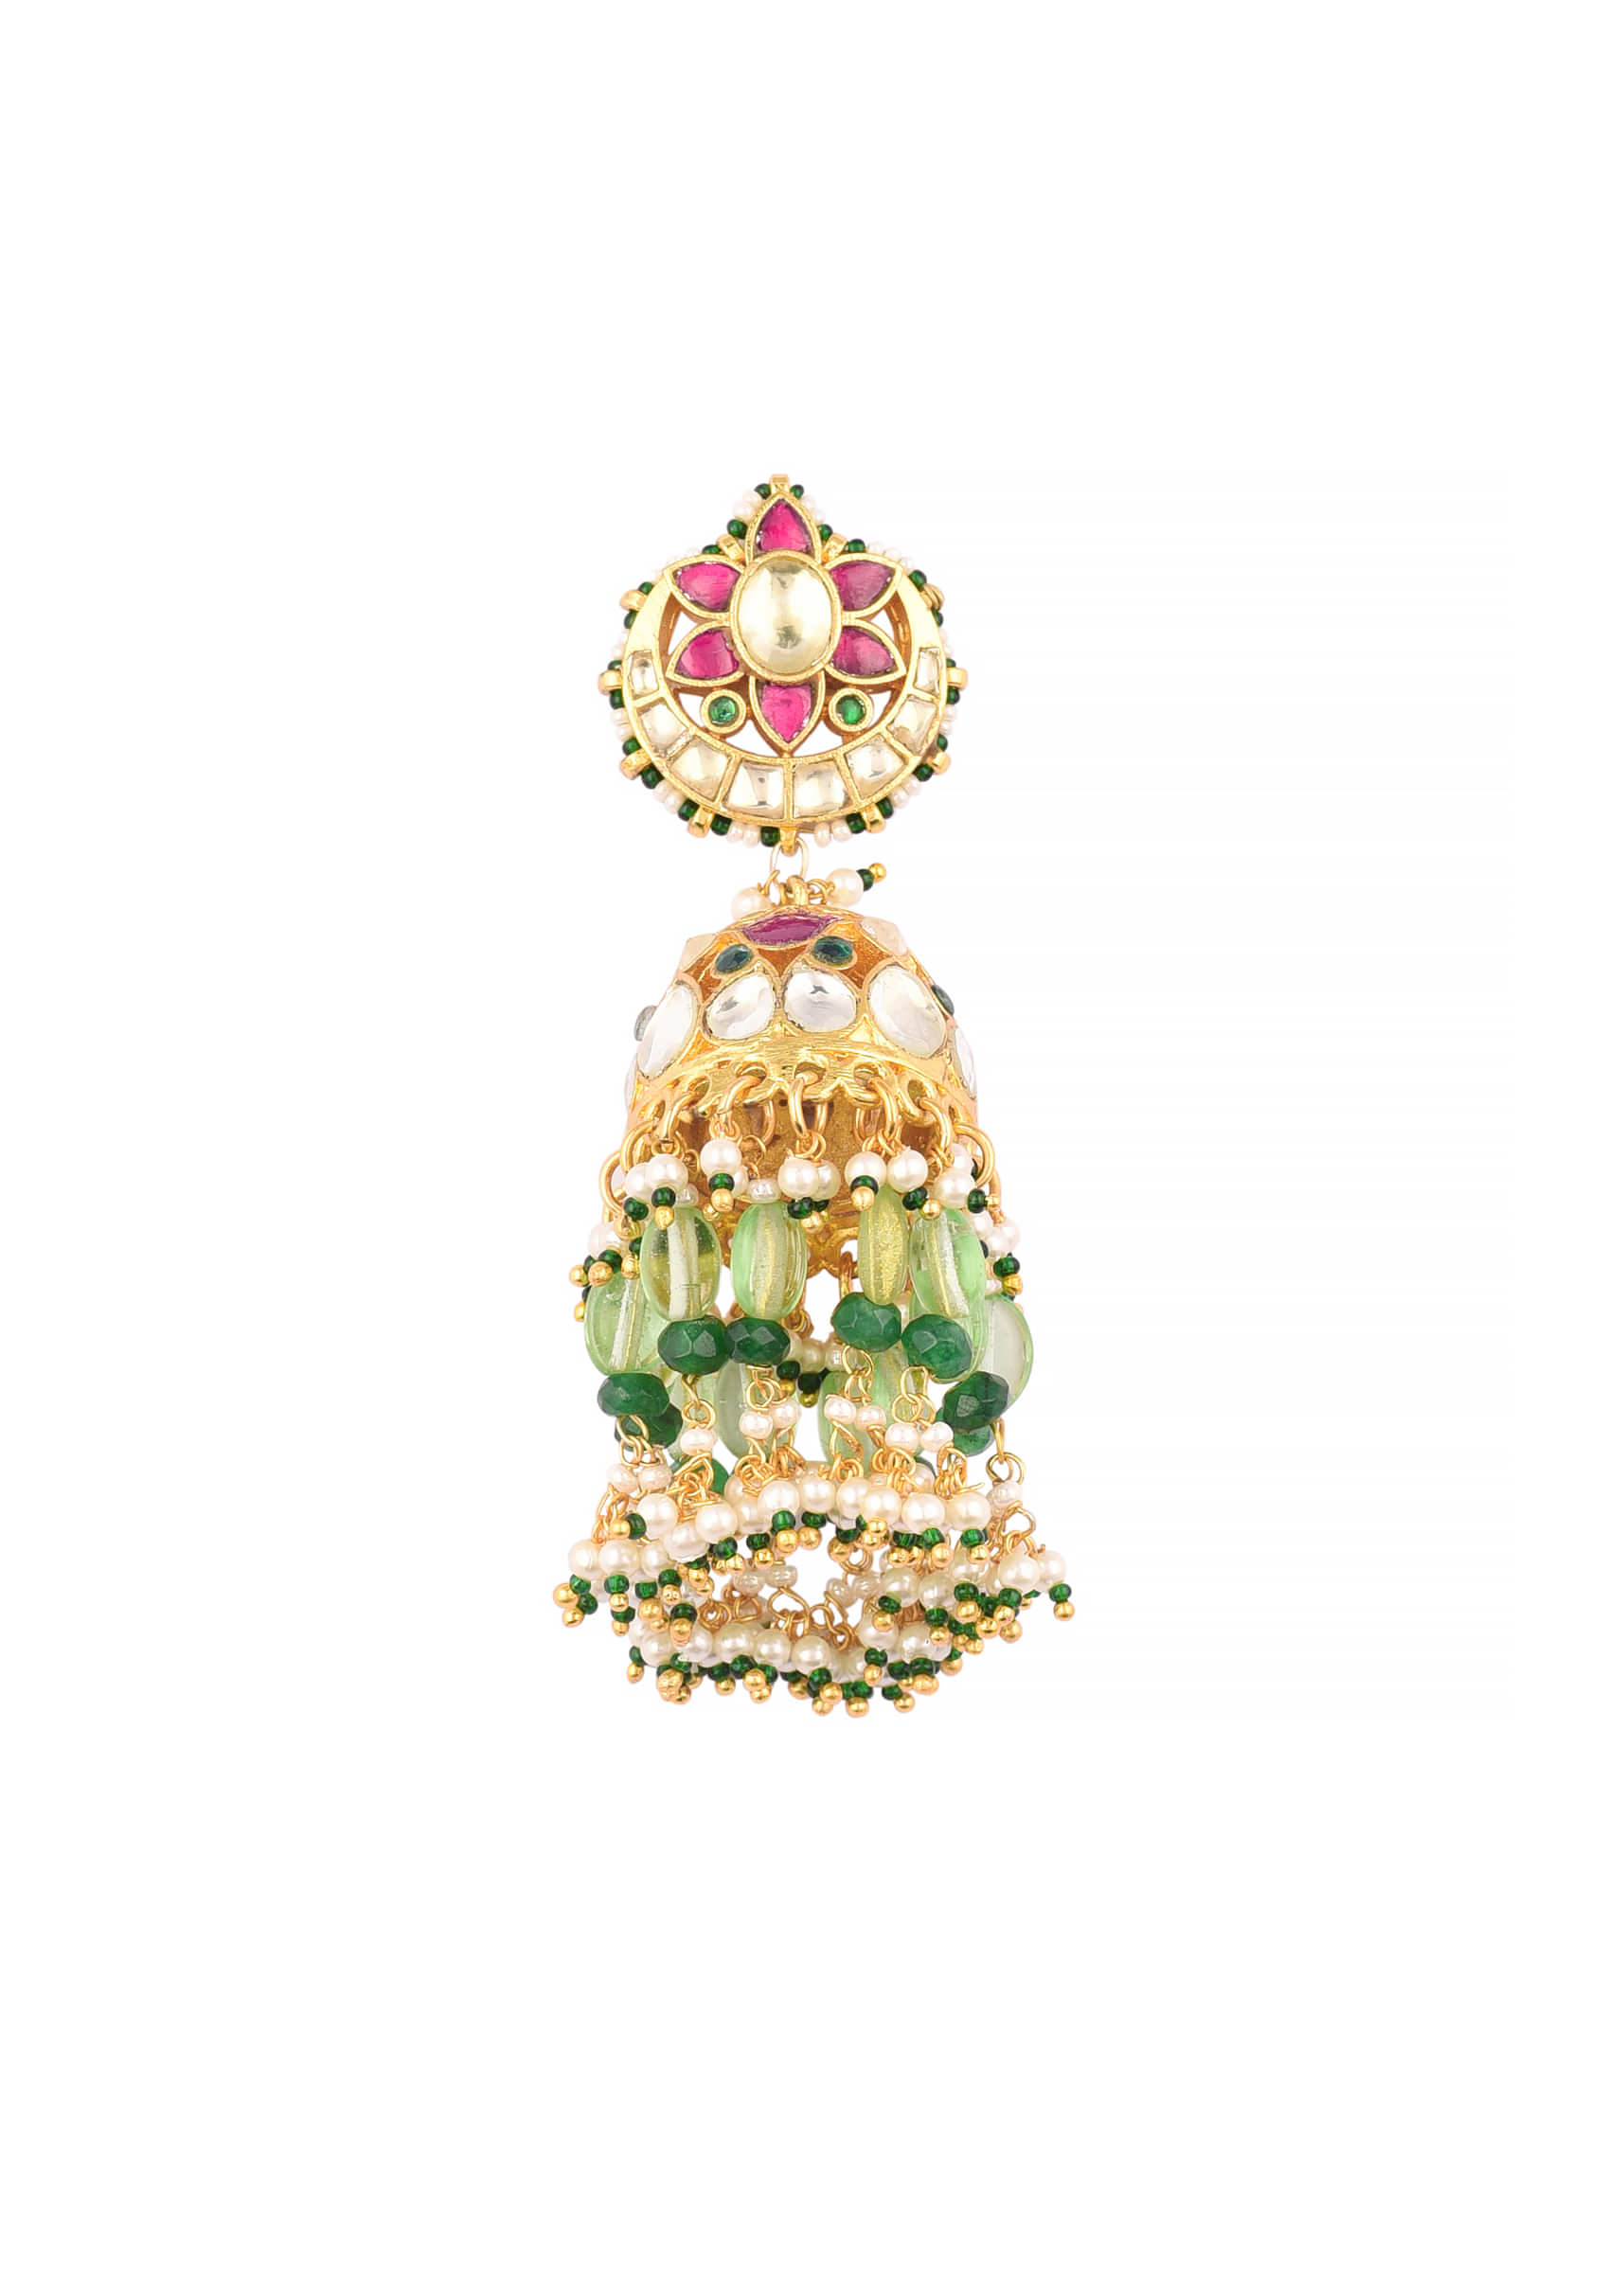 Gold Finish Kundan Polki Earrings With Beads And Stones